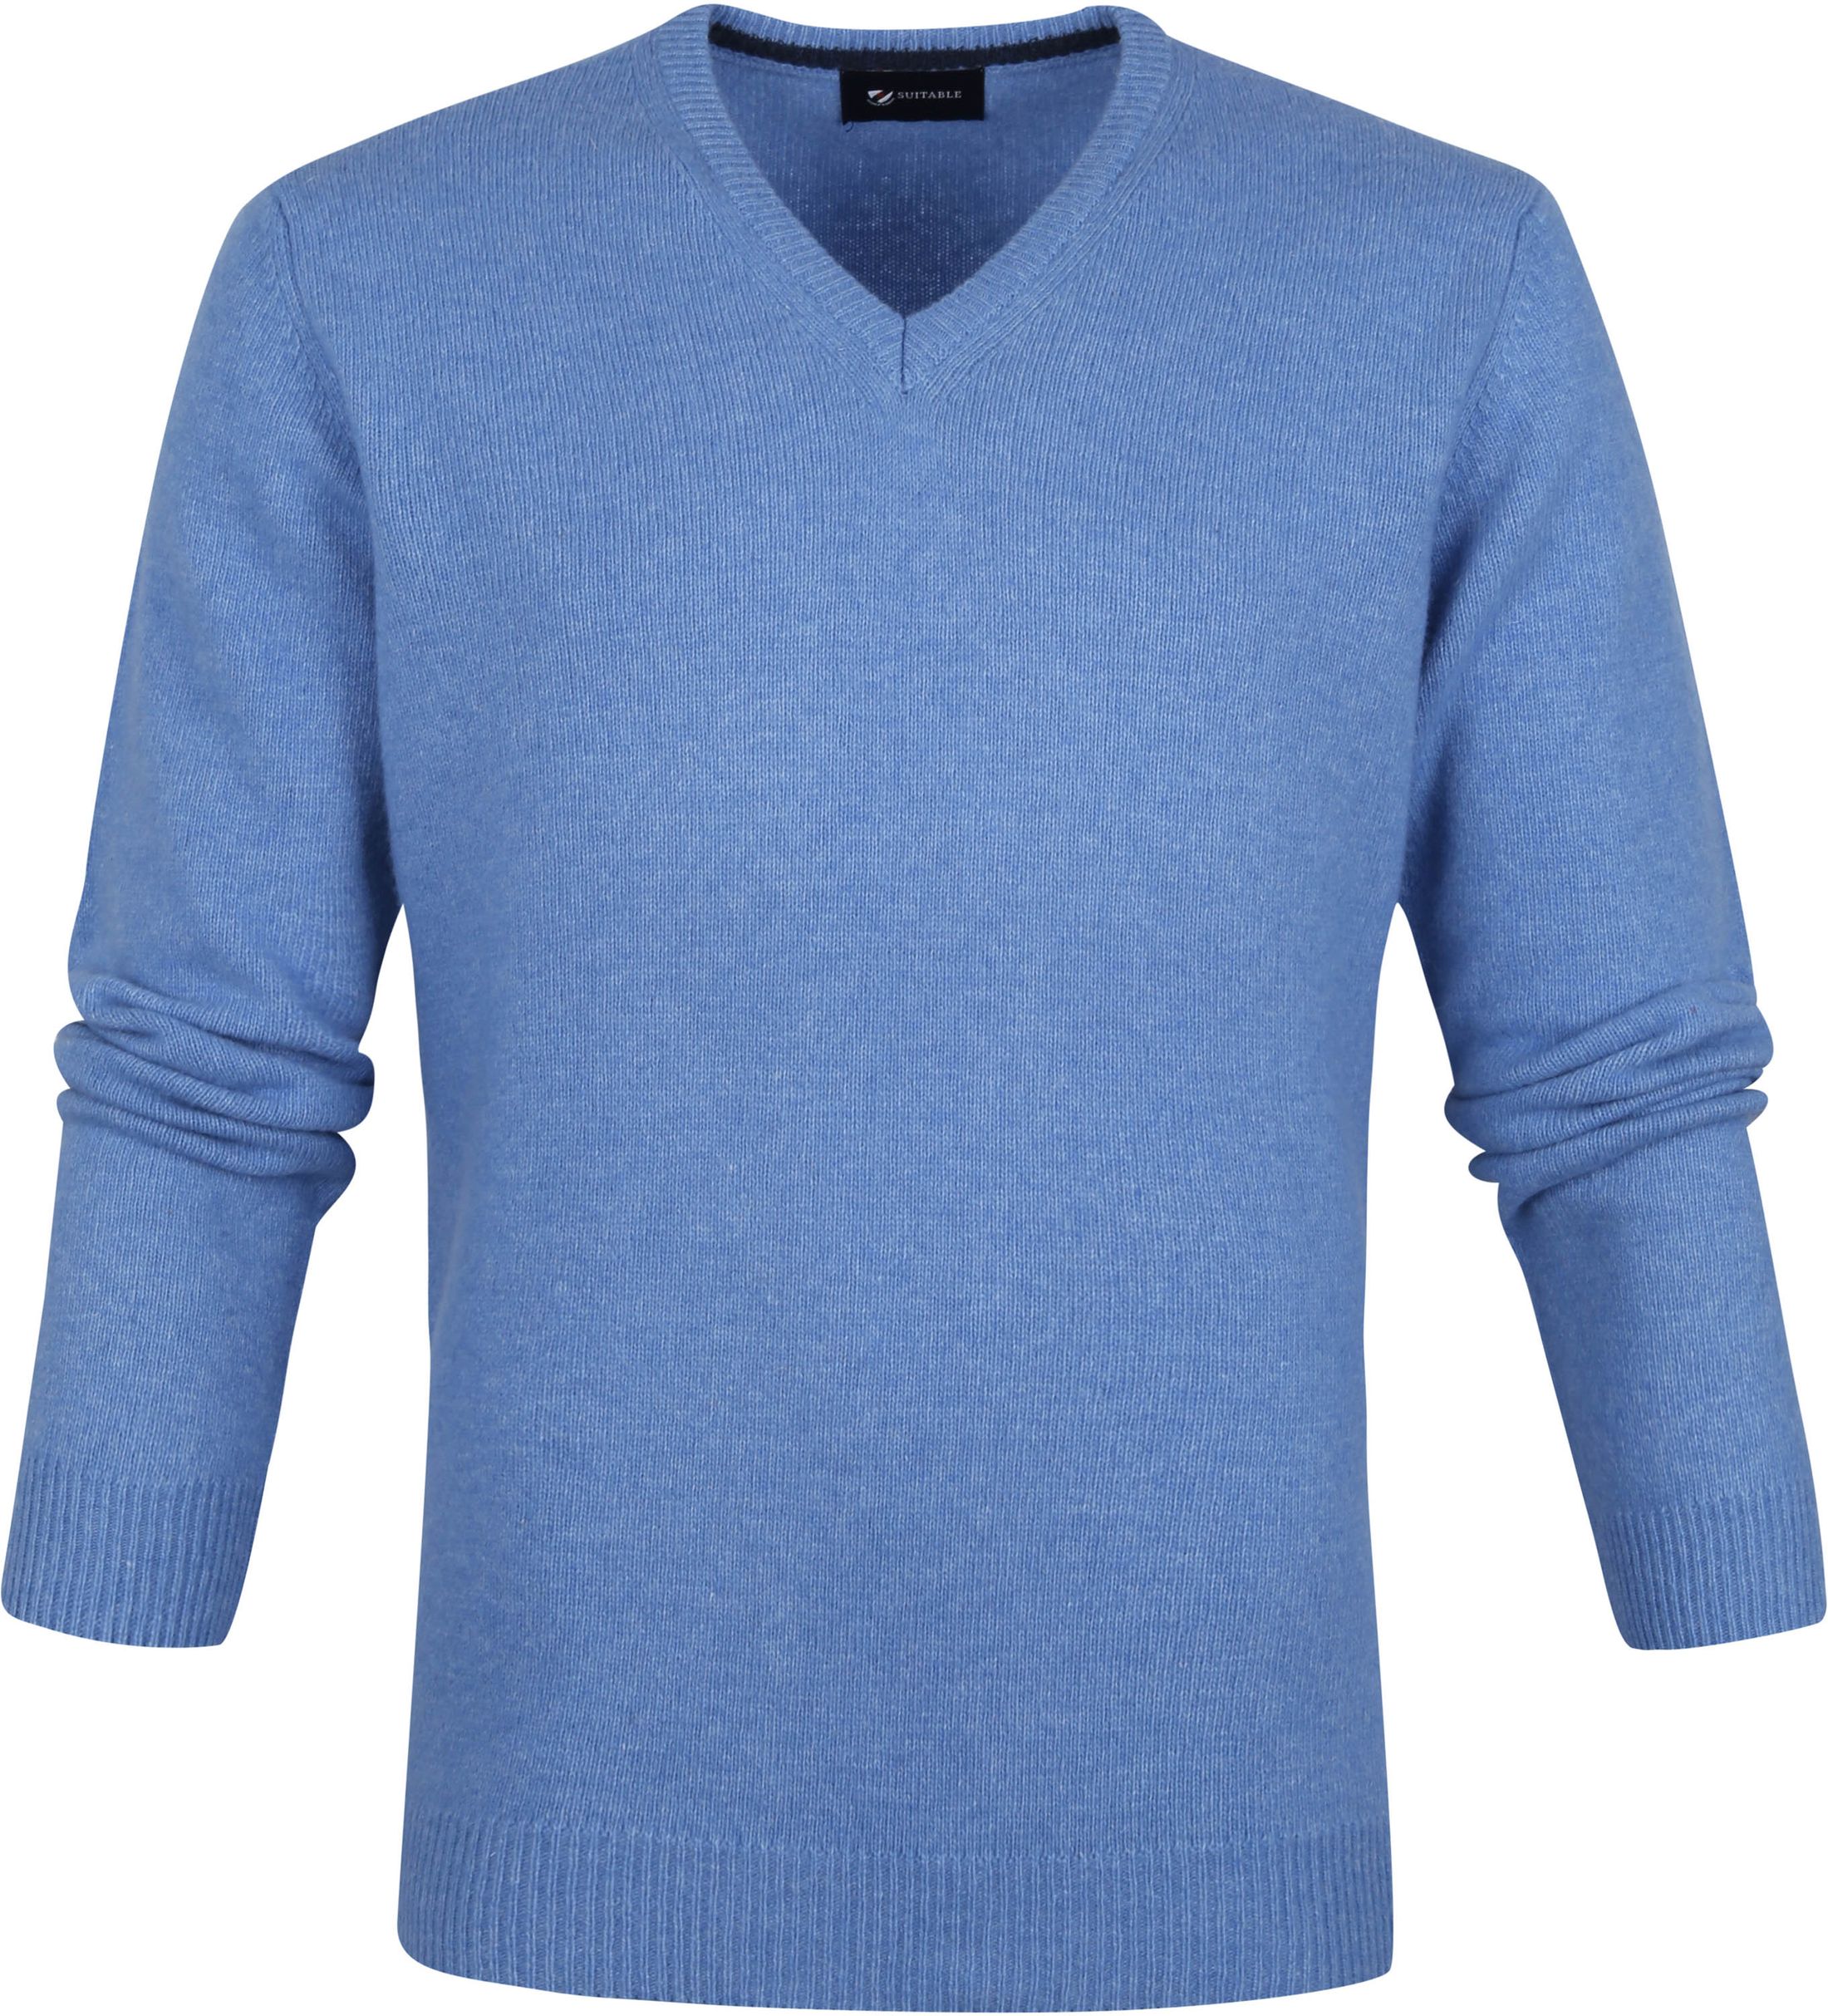 Suitable Lambswool Pullover V-Neck Blue size XL